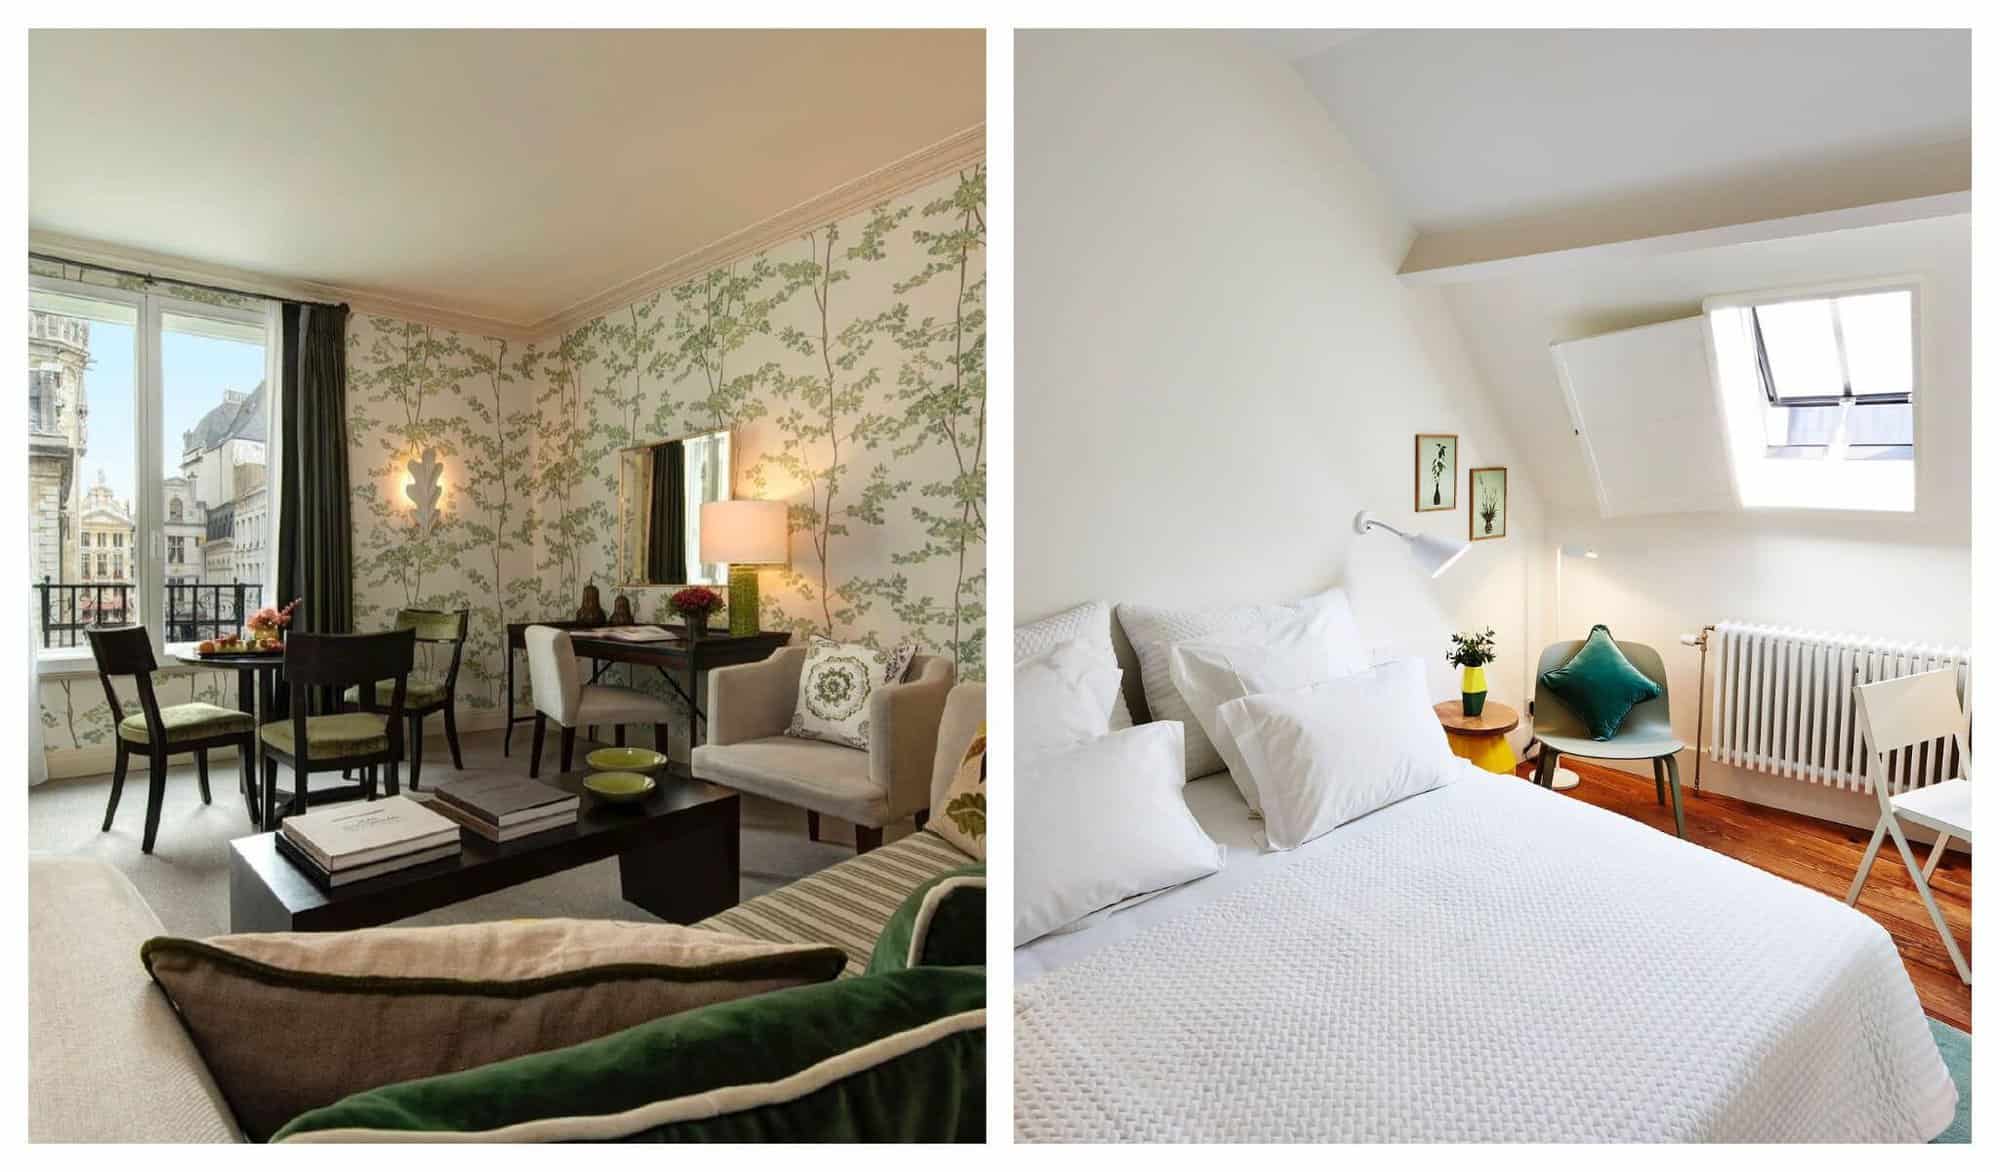 Left: Wooden chairs, a wooden table, and couch are pictured inside a suite at Hotel Amigo Right: A white double bed is illuminated by the sunshine coming in from a nearby window inside Hôtel des Galeries 